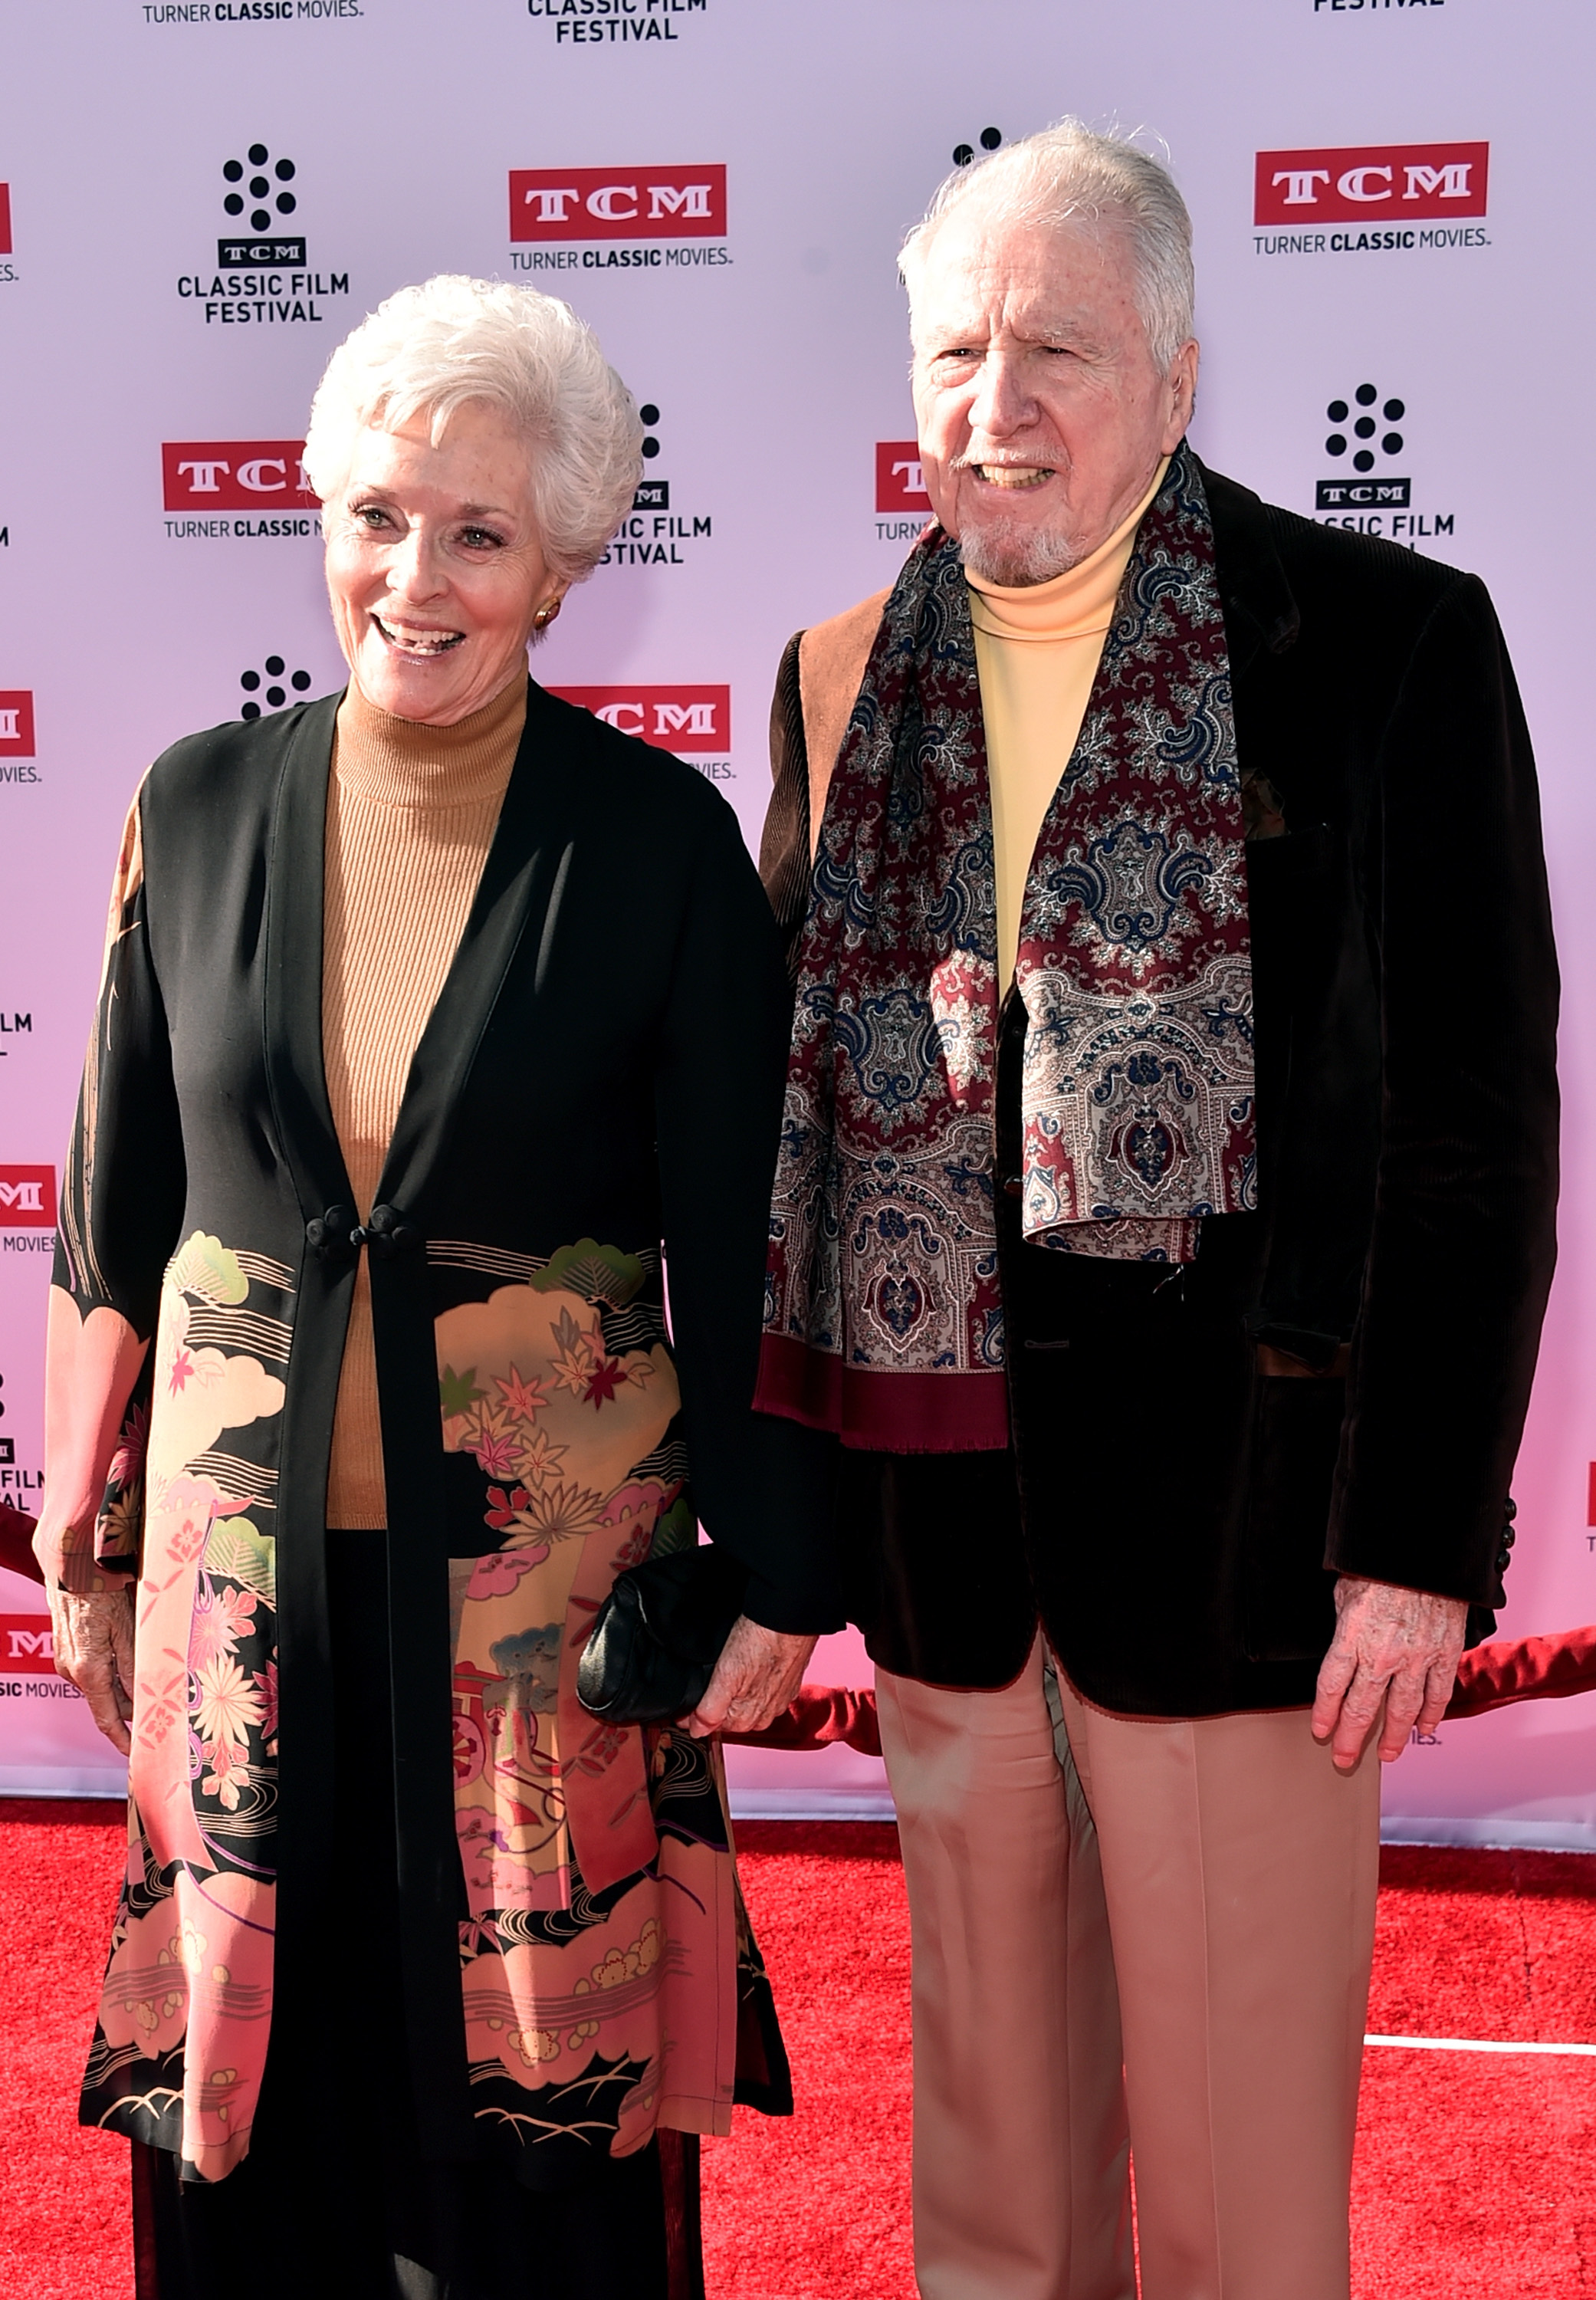 Actors Lee Meriwether (L) and Marshall Borden at the premiere of "All The President's Men" during the TCM Classic Film Festival 2016 opening night on April 28, 2016, in Los Angeles, California. | Source: Getty Images